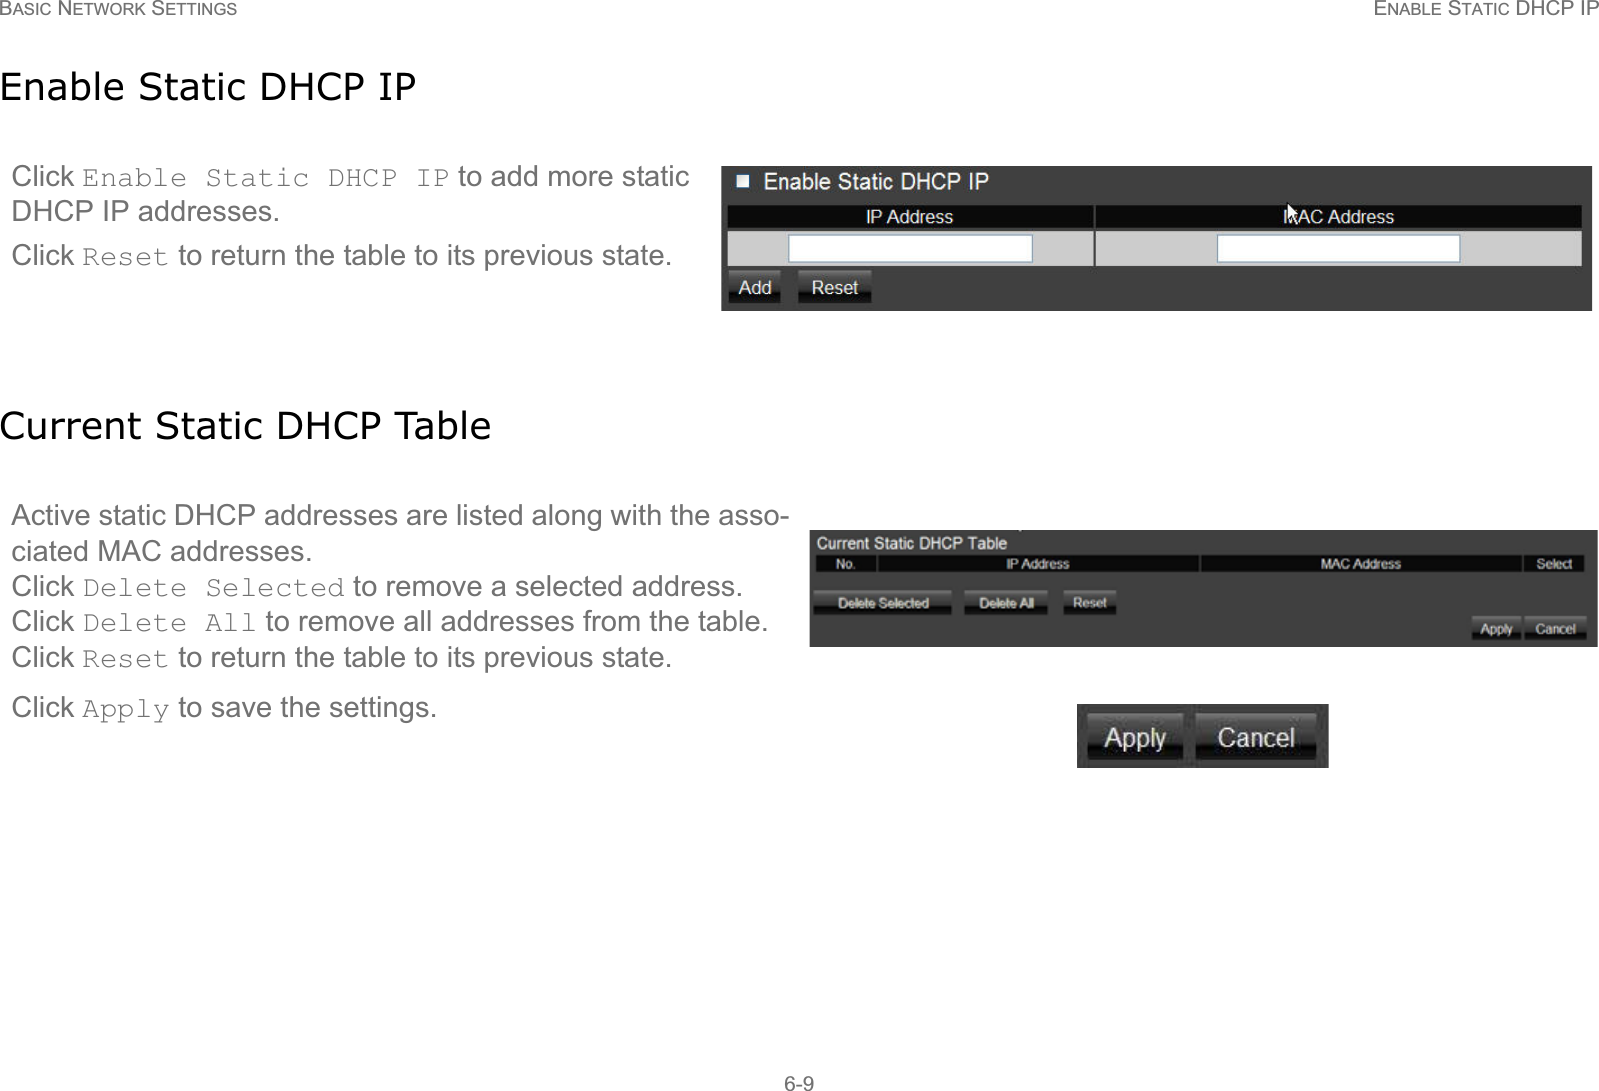 BASIC NETWORK SETTINGS ENABLE STATIC DHCP IP6-9Enable Static DHCP IPCurrent Static DHCP TableClick Enable Static DHCP IP to add more static DHCP IP addresses. Click Reset to return the table to its previous state.Active static DHCP addresses are listed along with the asso-ciated MAC addresses. Click Delete Selected to remove a selected address. Click Delete All to remove all addresses from the table. Click Reset to return the table to its previous state.Click Apply to save the settings.